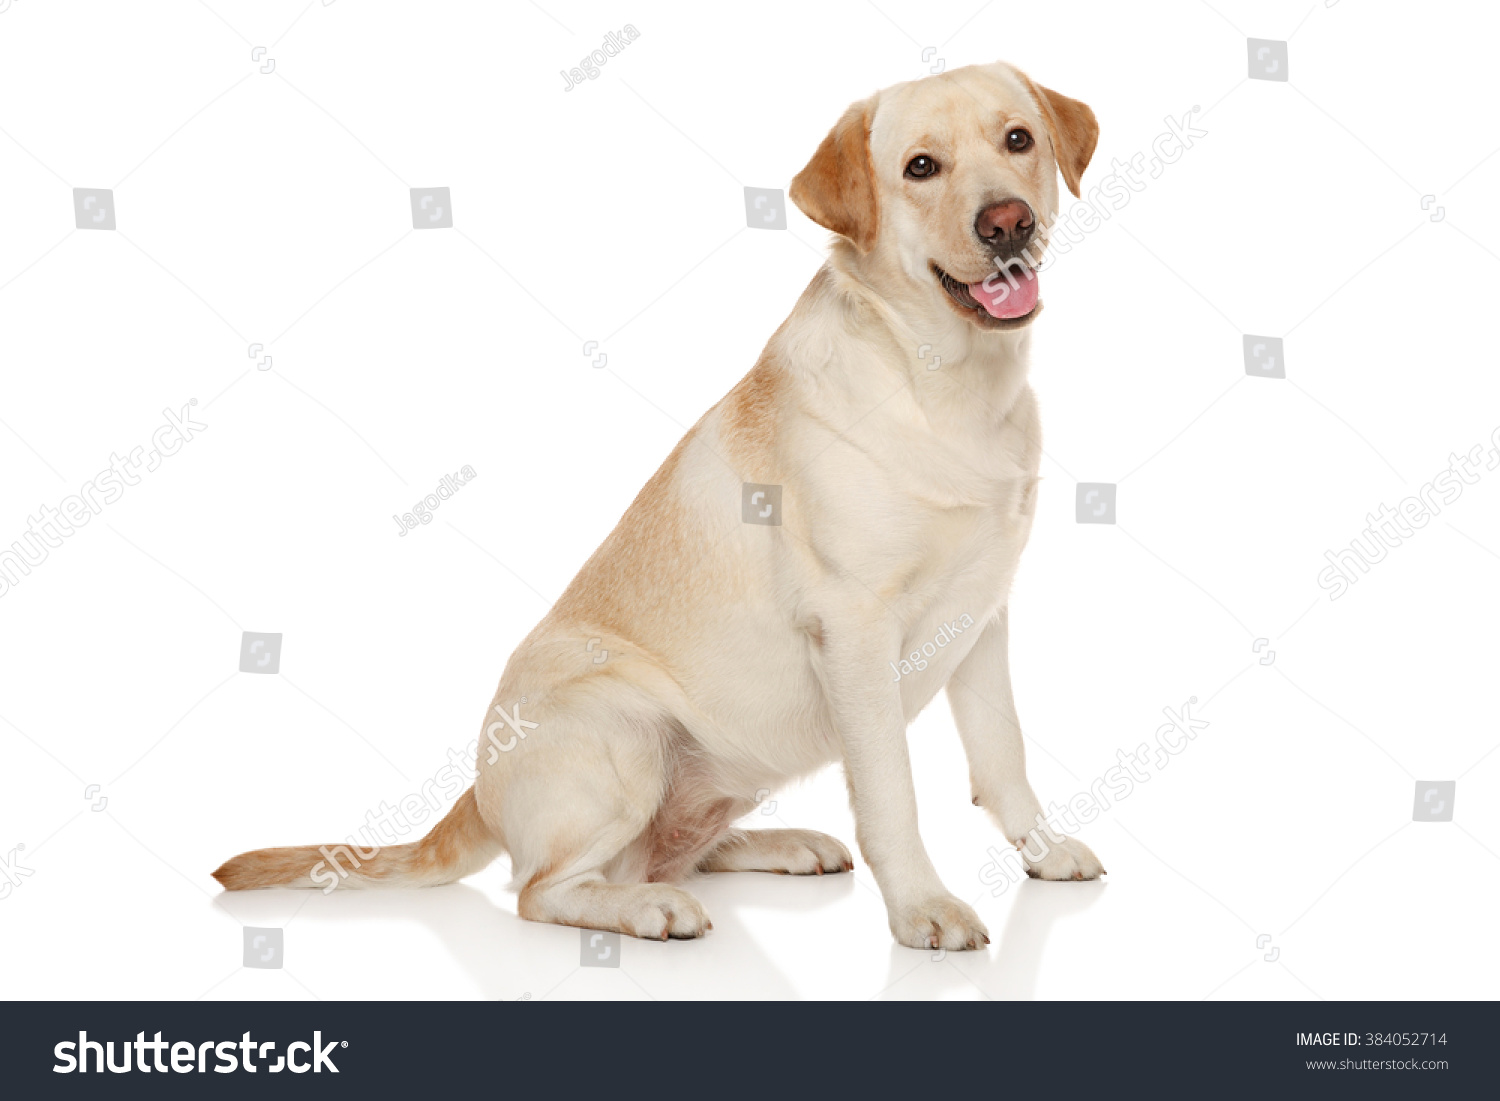 Beautiful Labrador retriever in front of white background #384052714